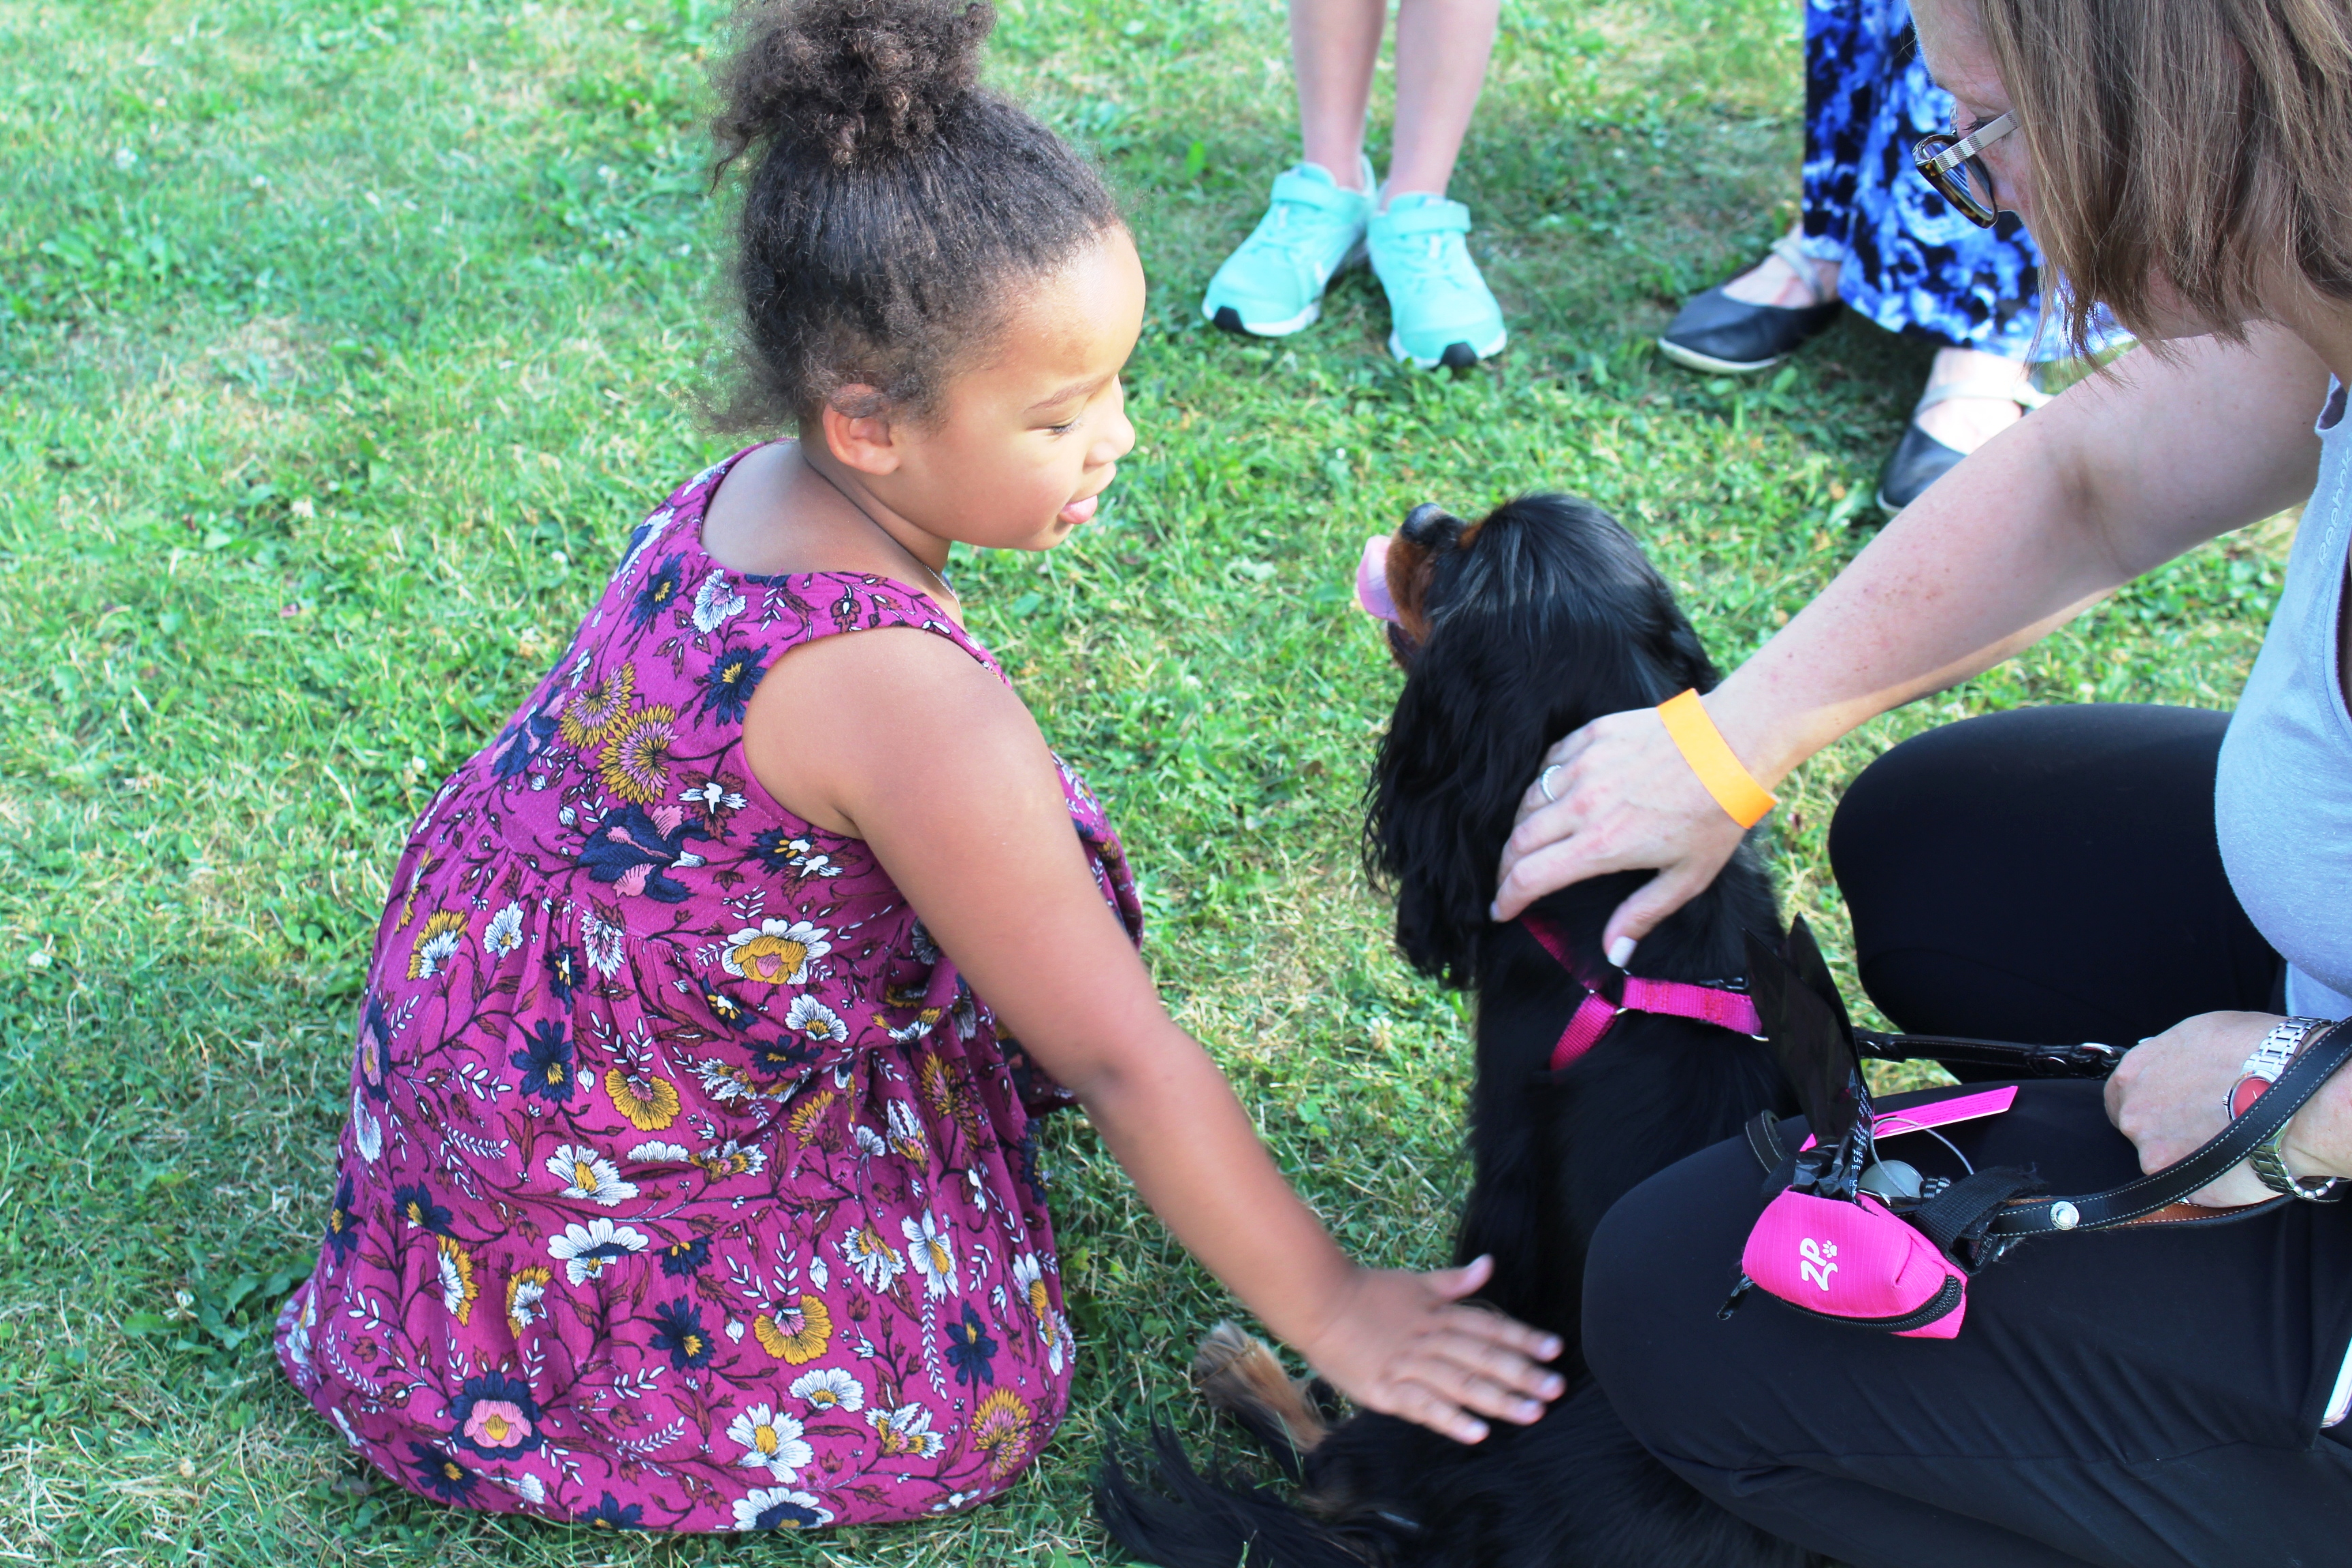 Girl petting dog at the Saratoga Dog & Pony Show to benefit AIM Services, Inc.